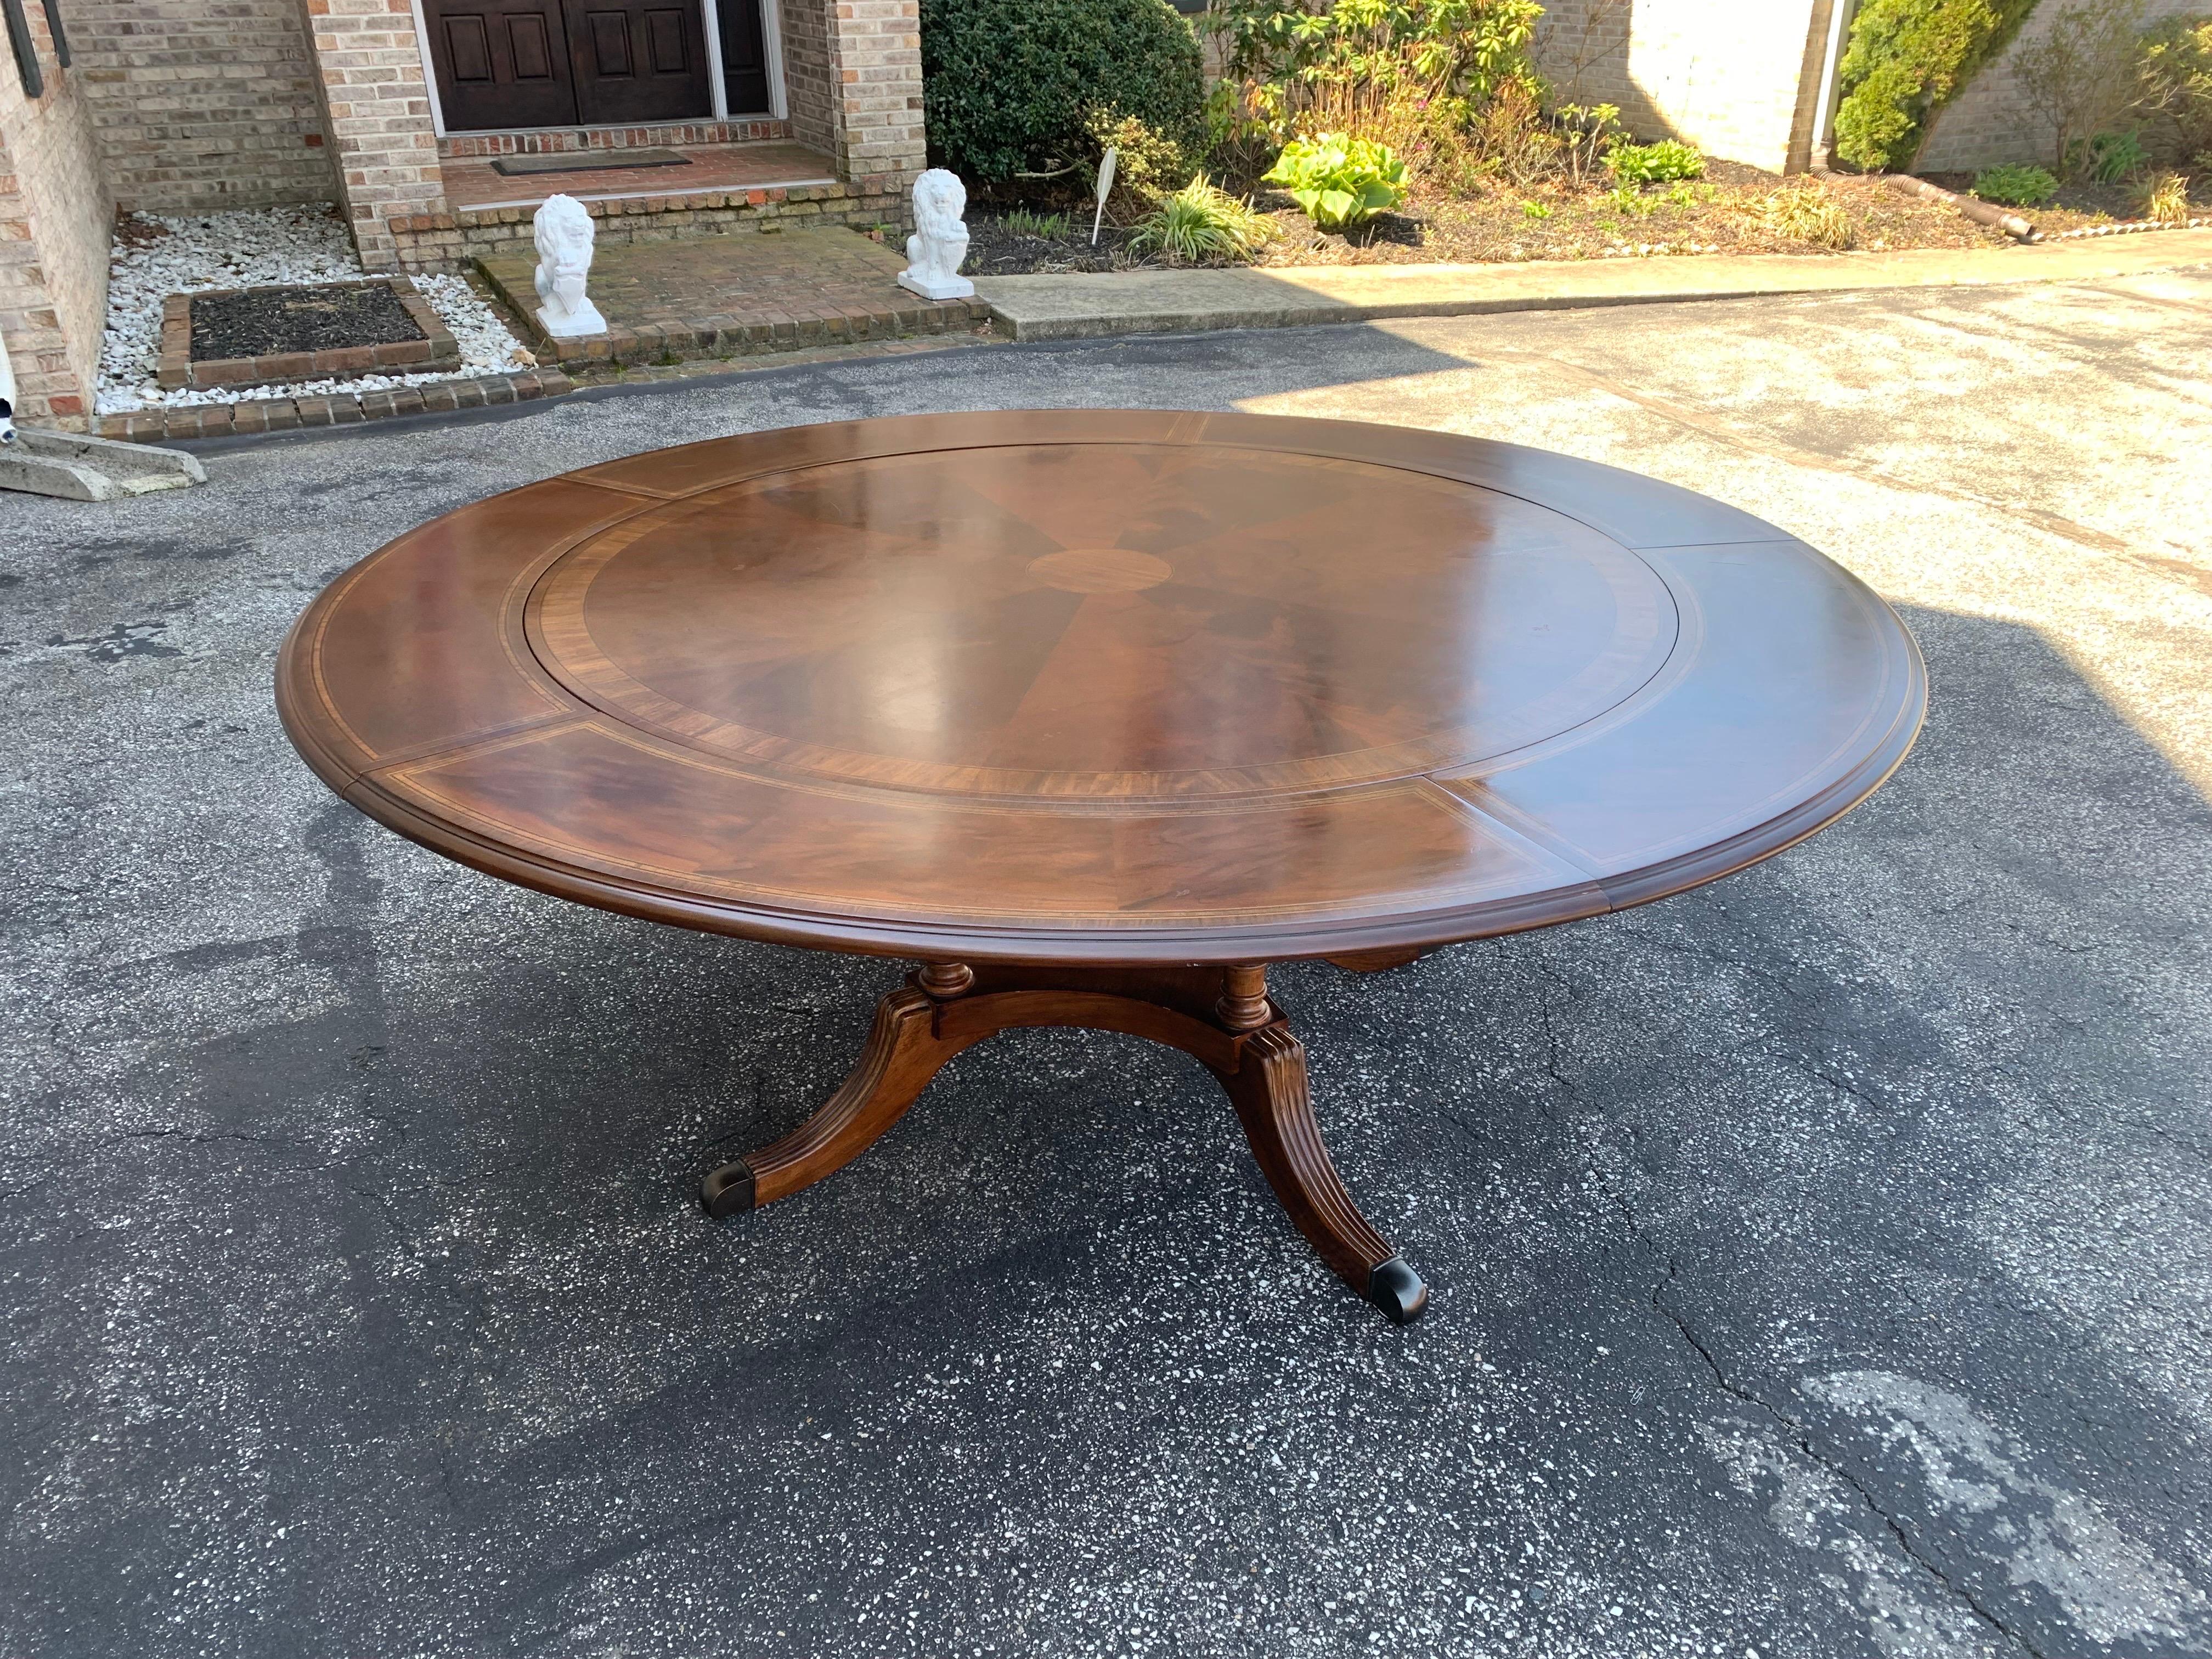 Mahogany Round Dining Table with Perimeter Leaves Oversized 3